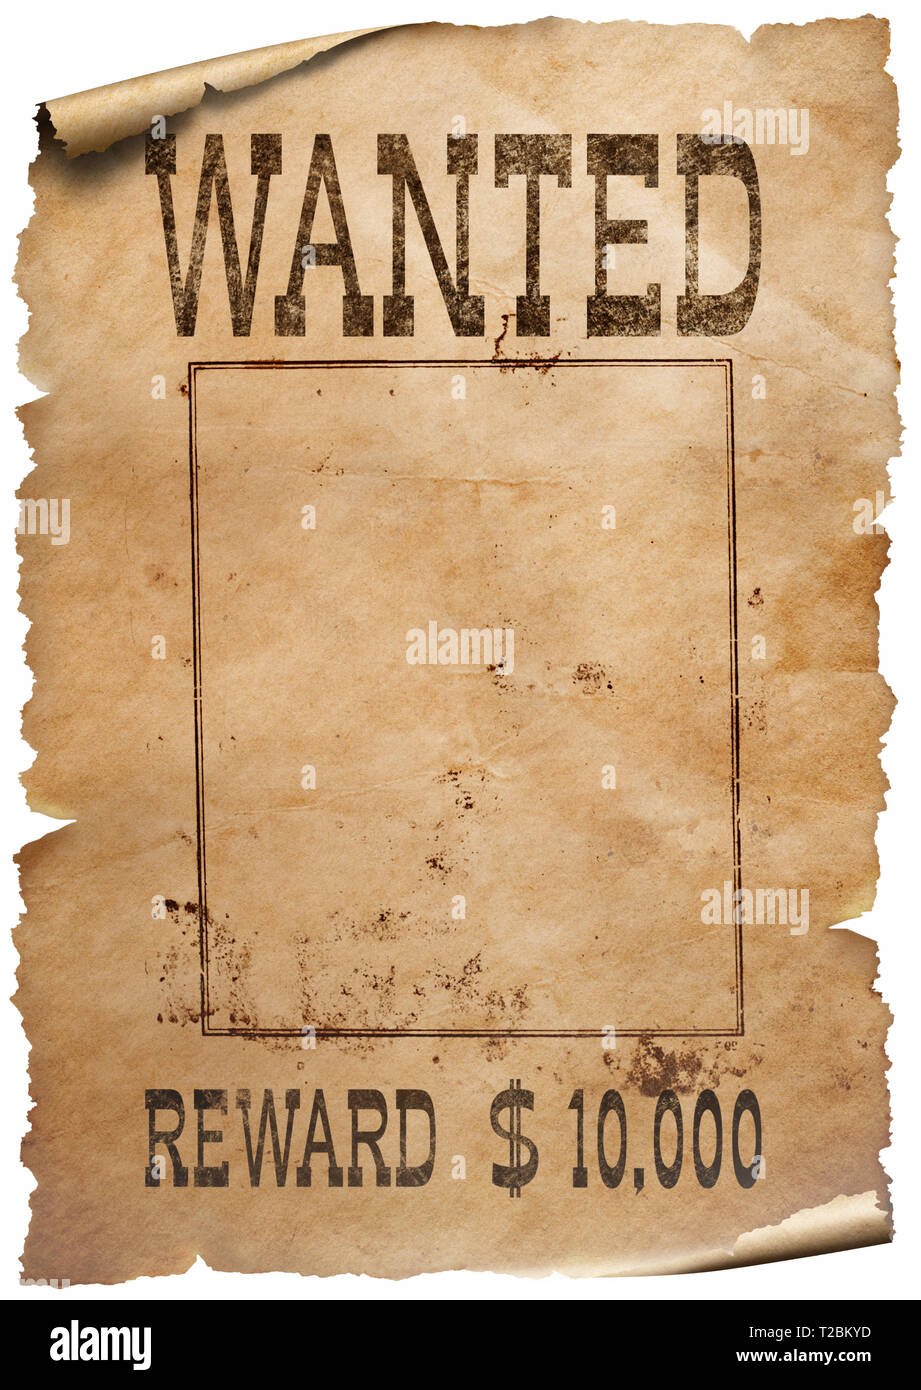 Wanted wild west poster isolated on white background Stock Photo